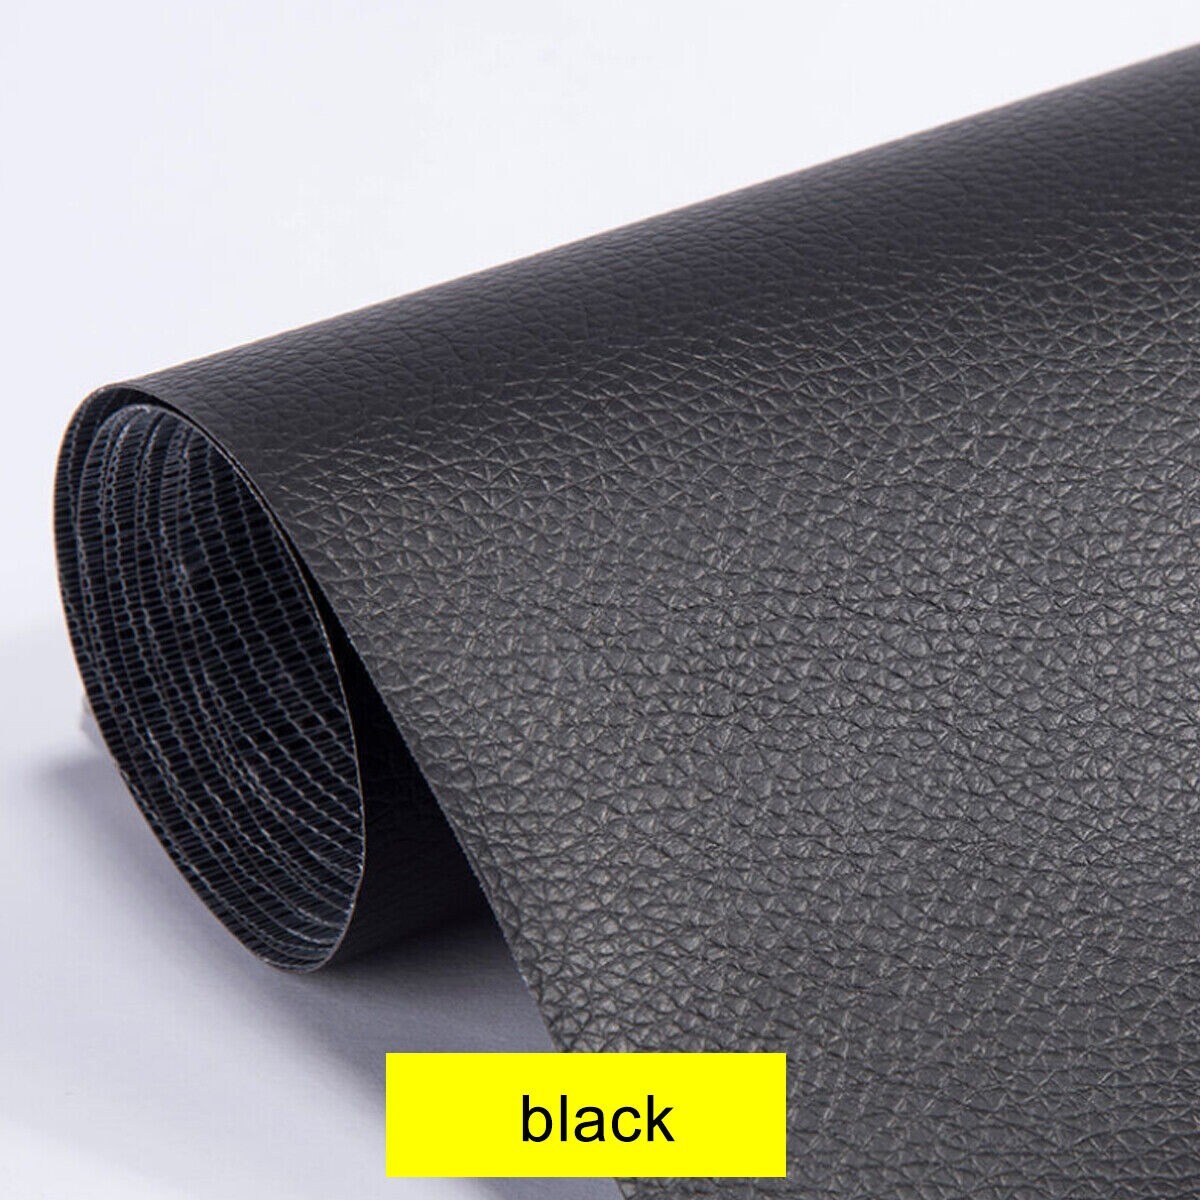 Self-Adhesive Leather Repair Patch Tape for Sofas, Car Seats